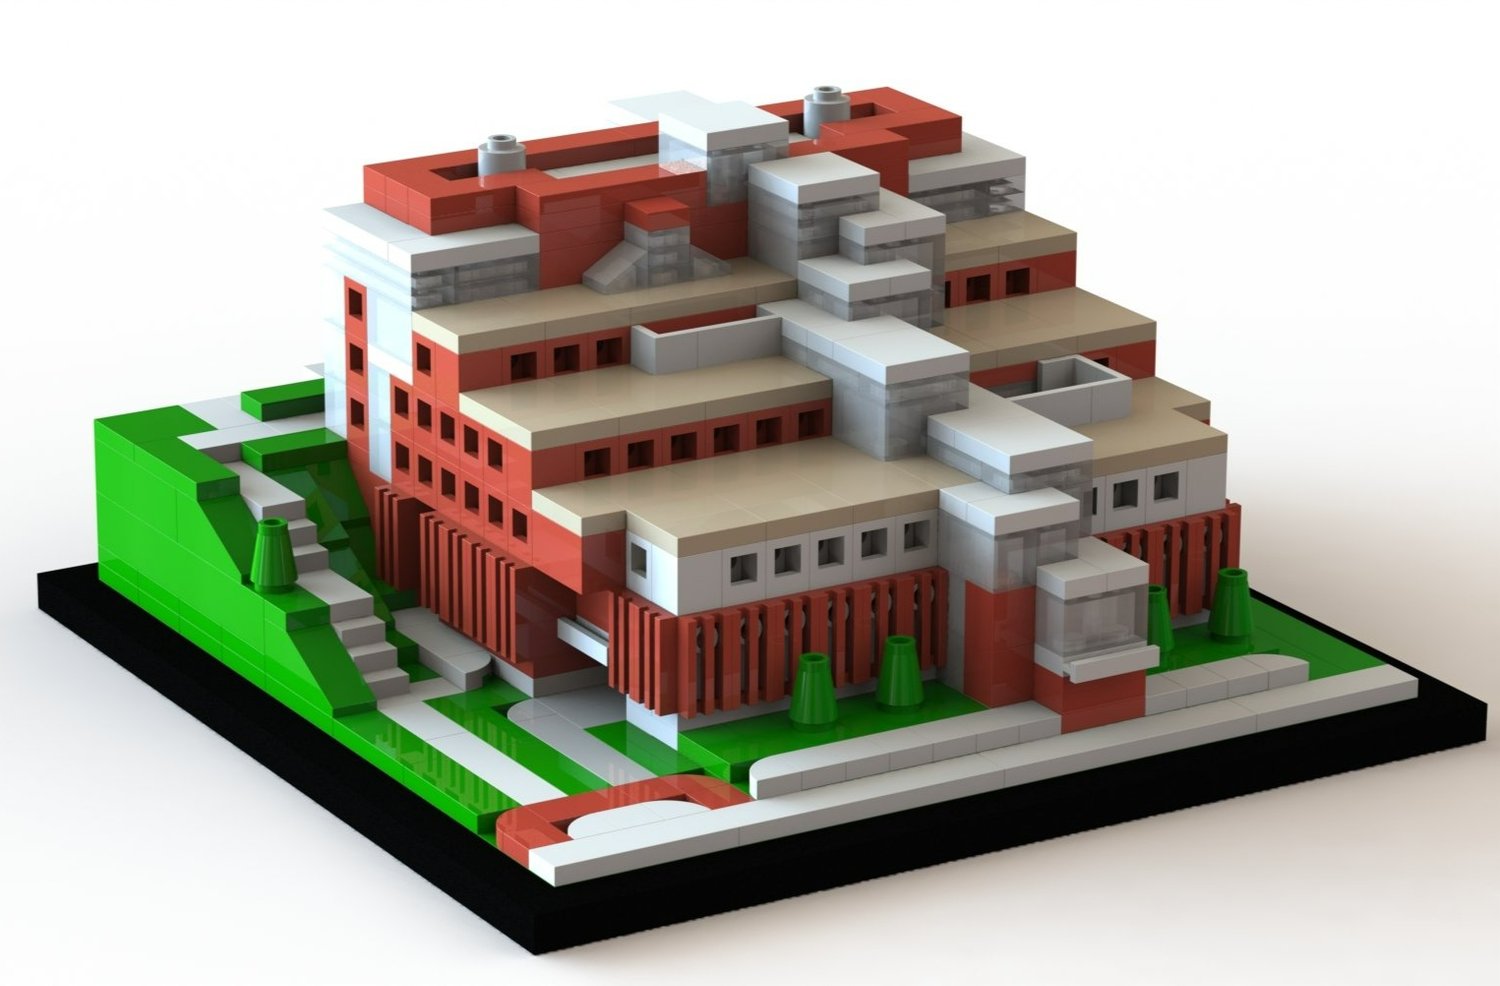 BYU mechanical engineering students create Lego campus building renderings  - The Daily Universe